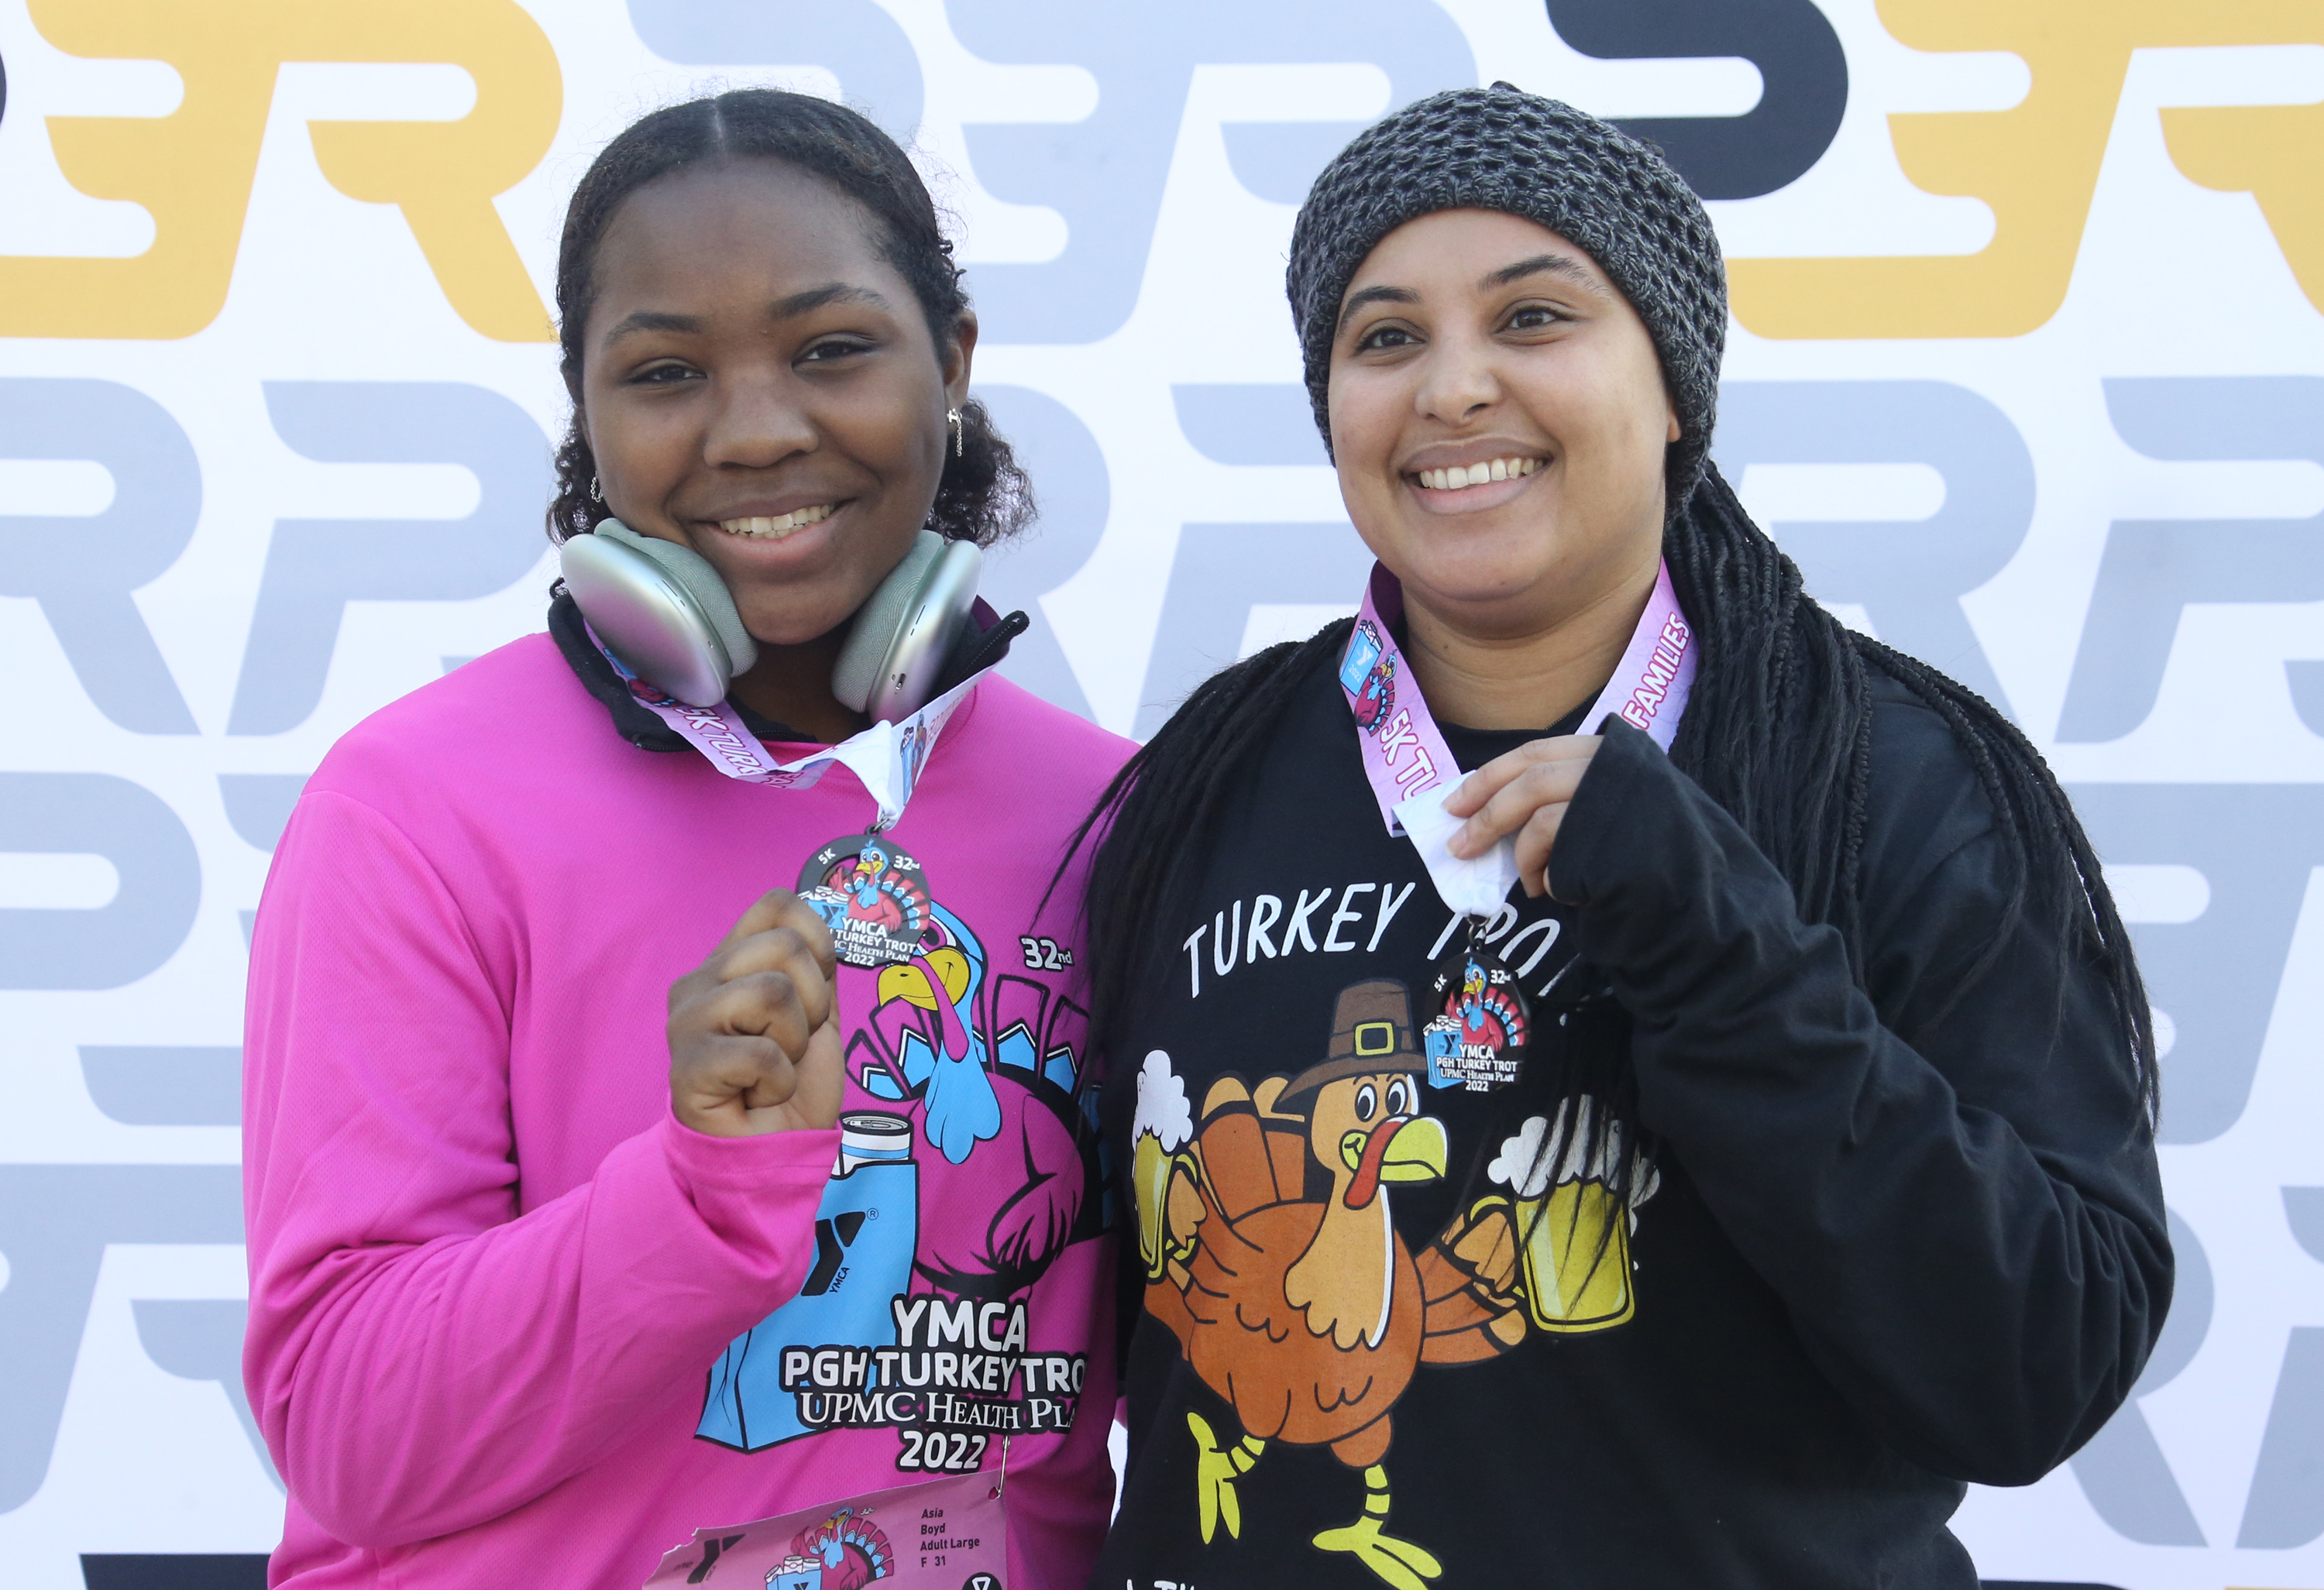 Two young women at the 2022 Turkey Trot